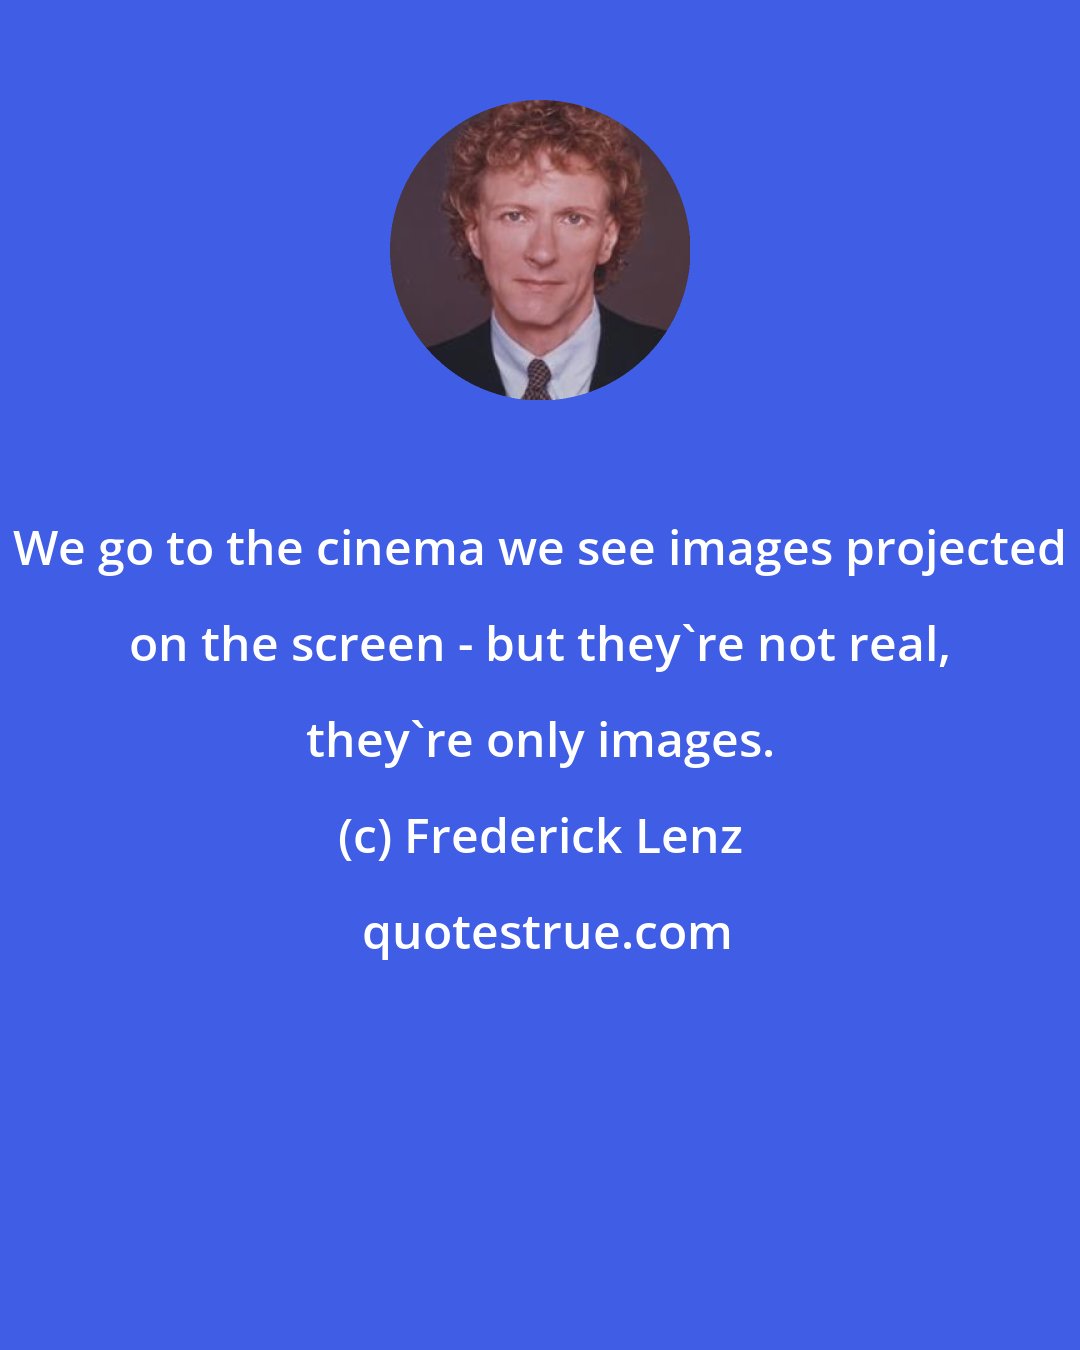 Frederick Lenz: We go to the cinema we see images projected on the screen - but they're not real, they're only images.